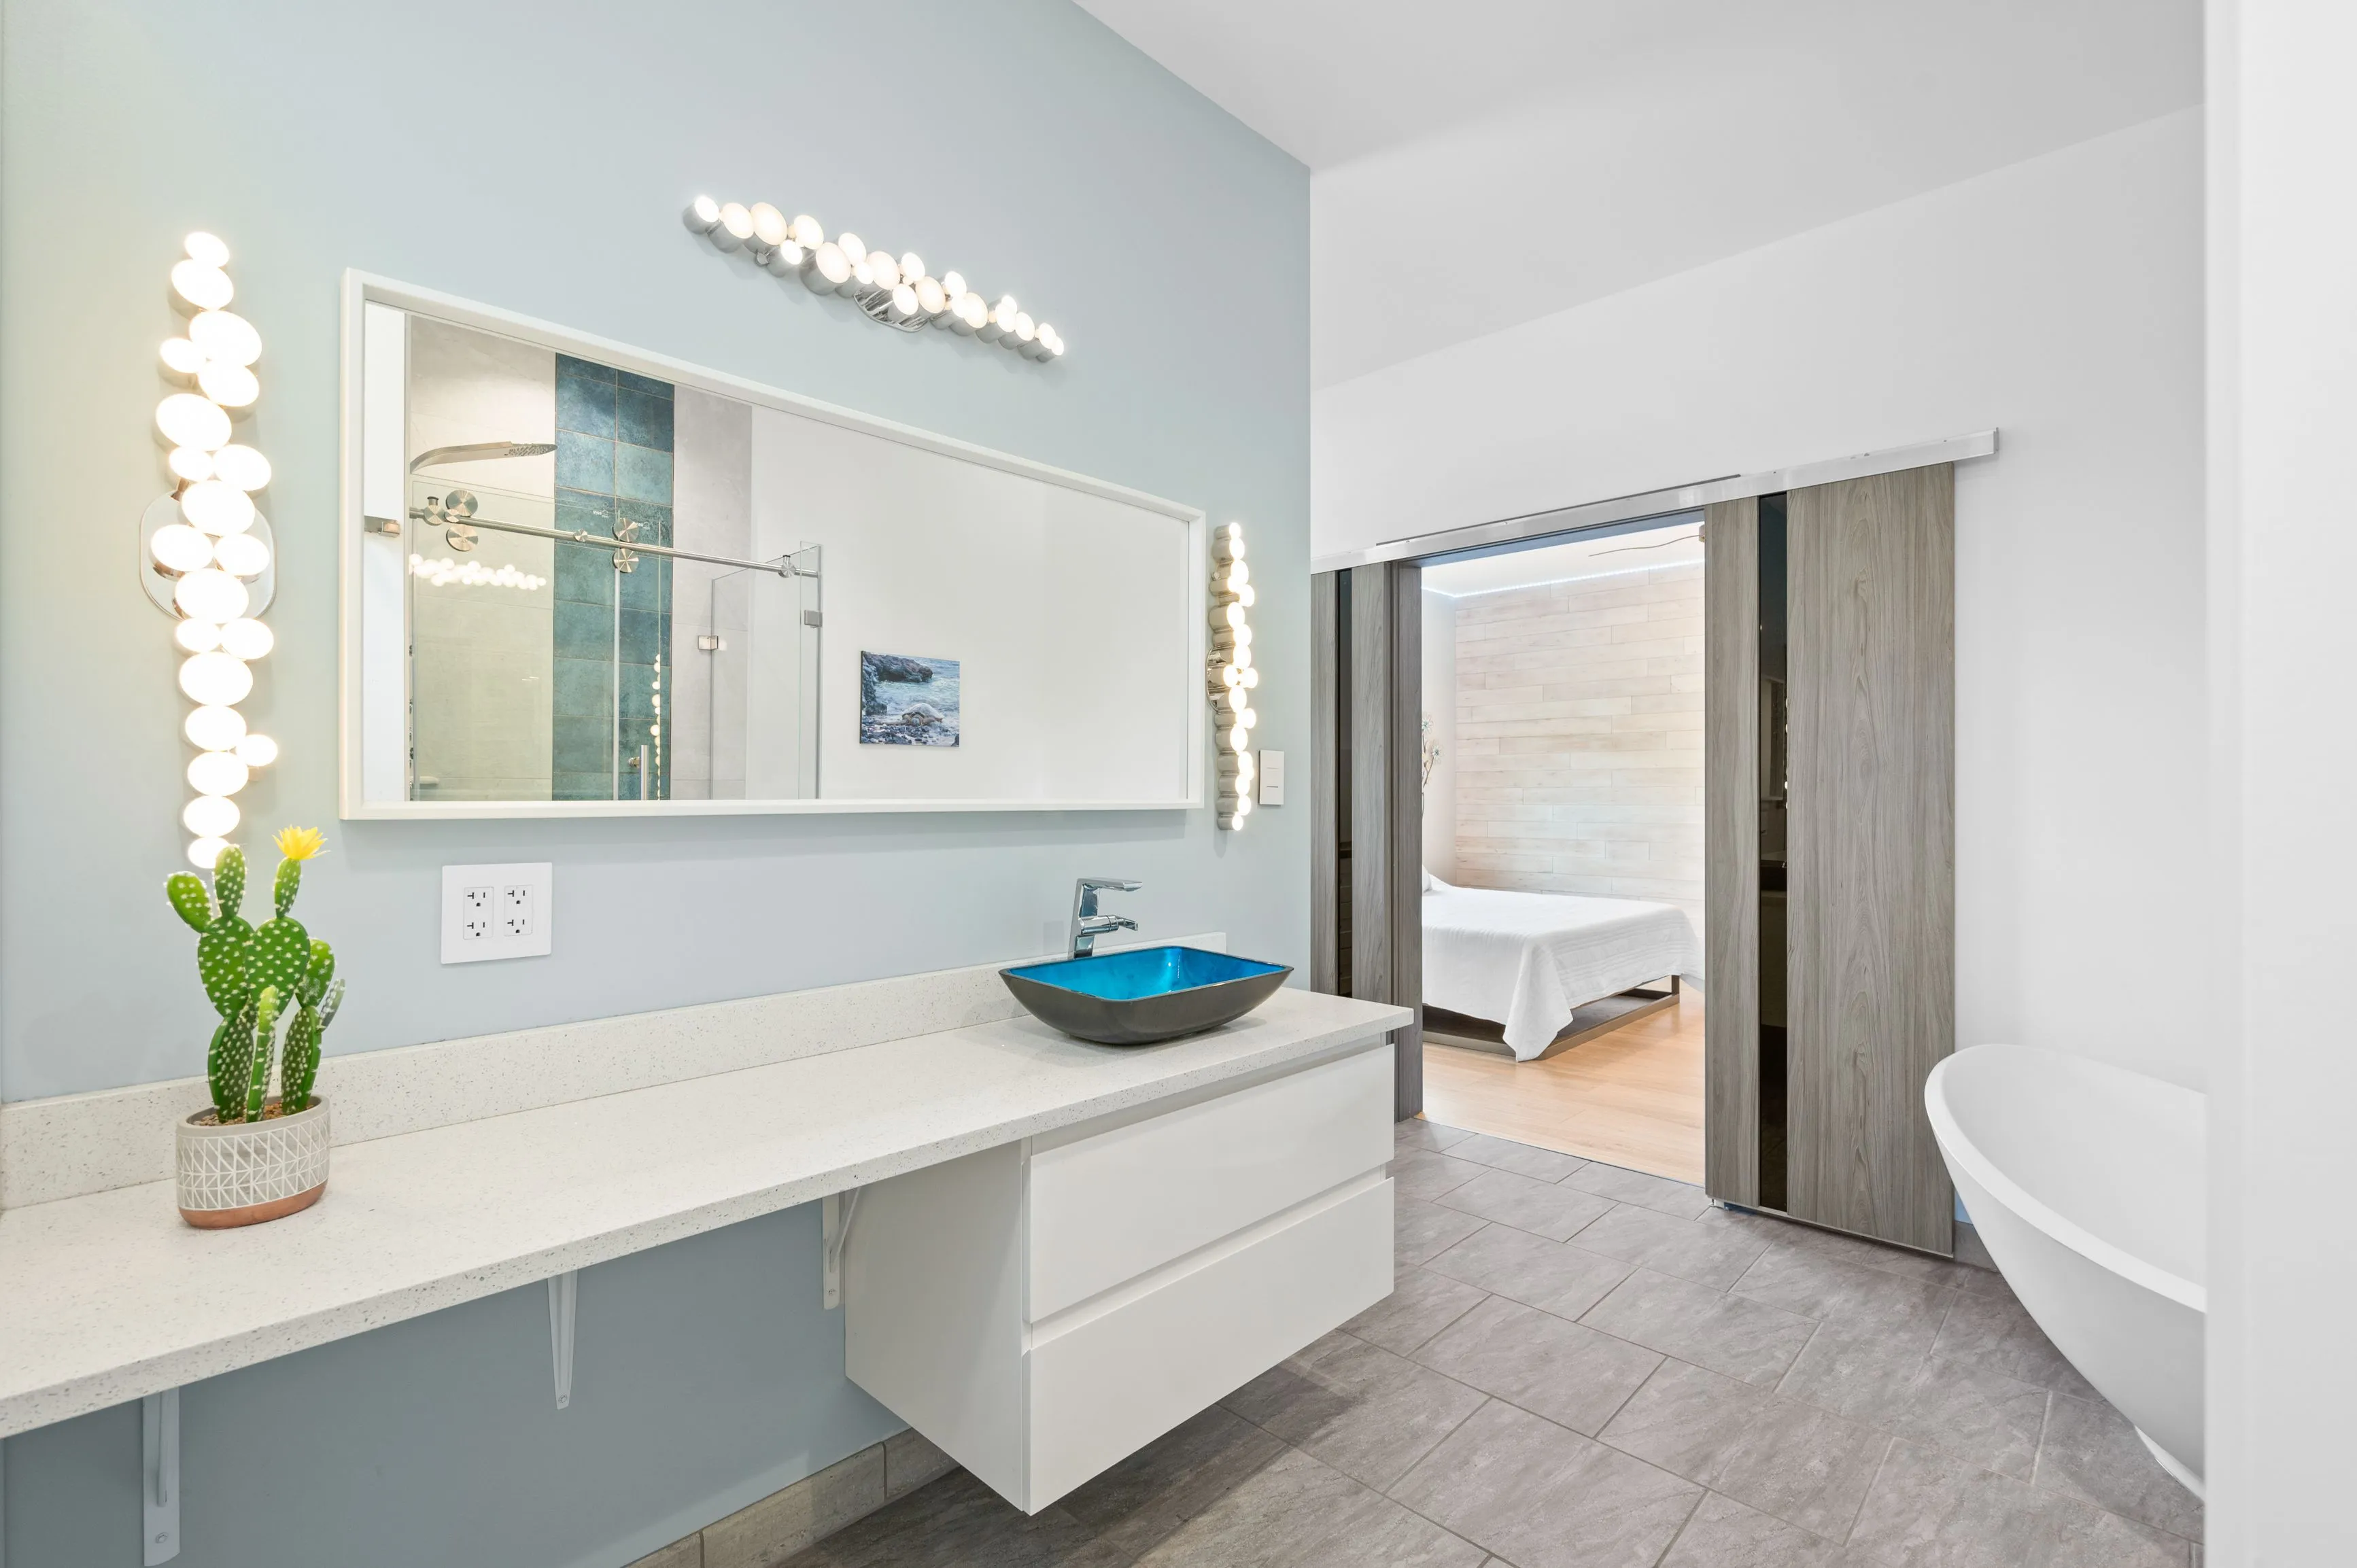 Modern bright bathroom interior with a blue vessel sink, long mirror with vanity lights, a cactus decoration, and a view into the adjoining bedroom with a freestanding bathtub.